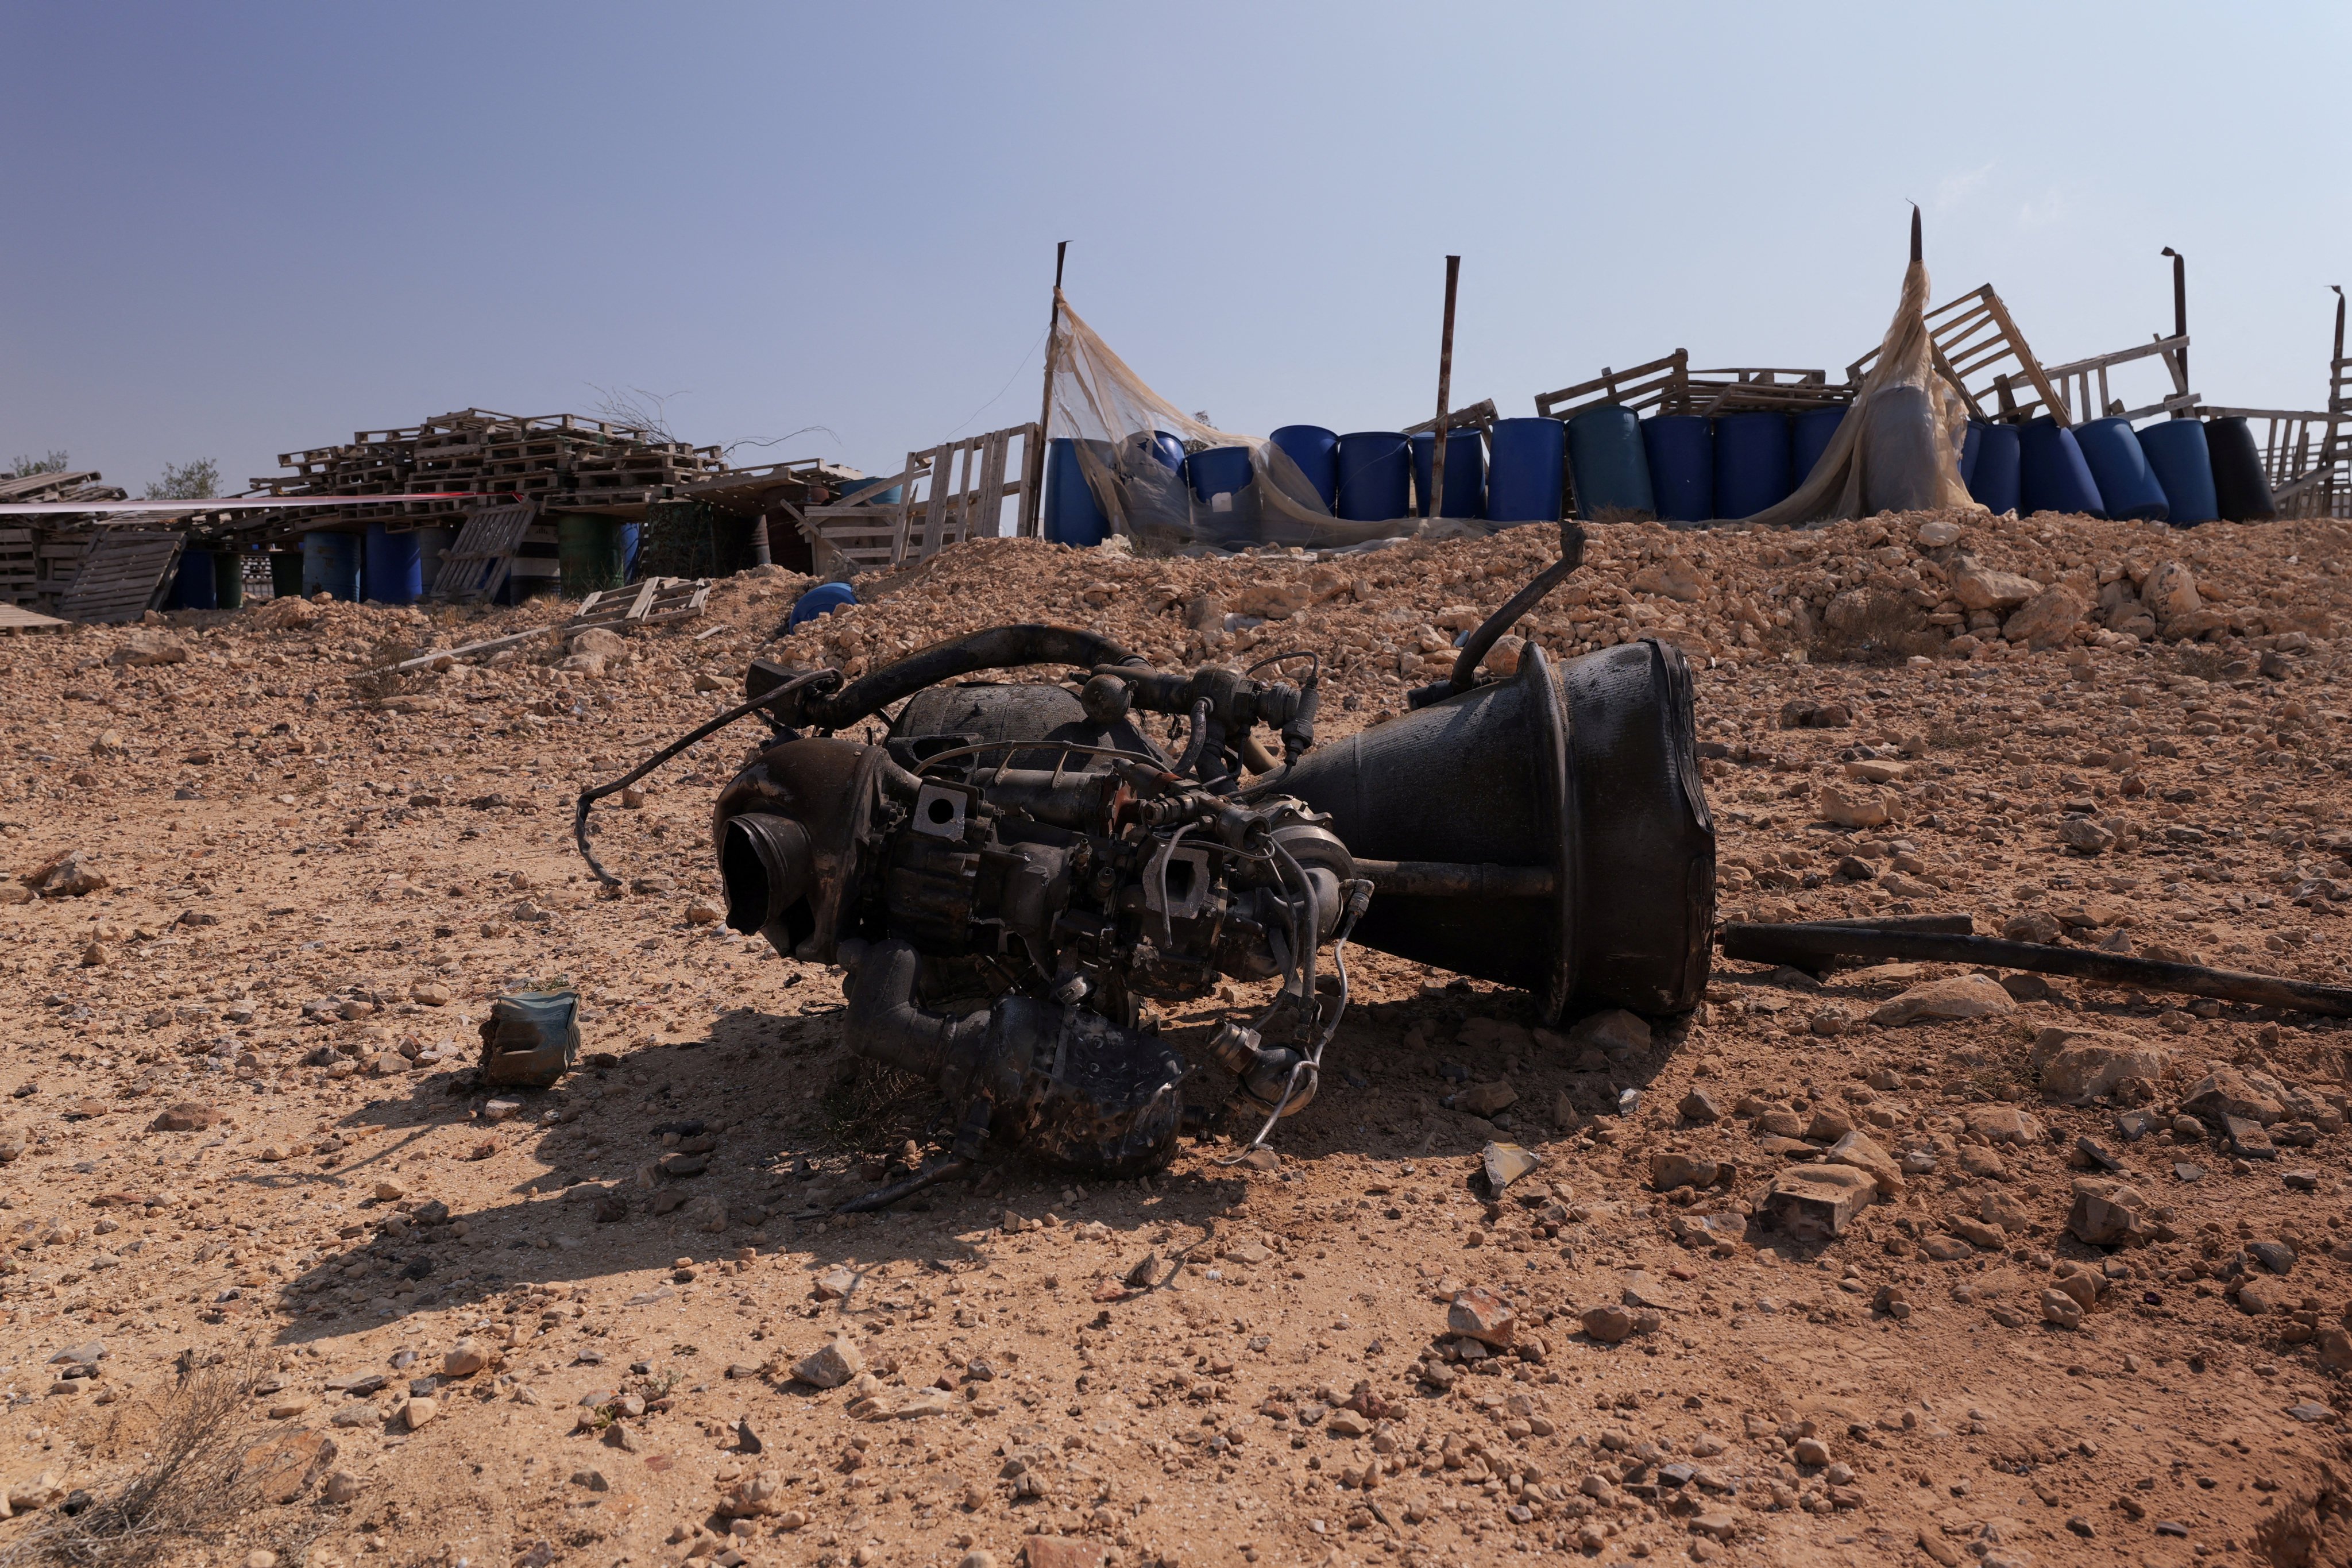 The remains of a rocket booster near Arad, Israel. Photo: Reuters